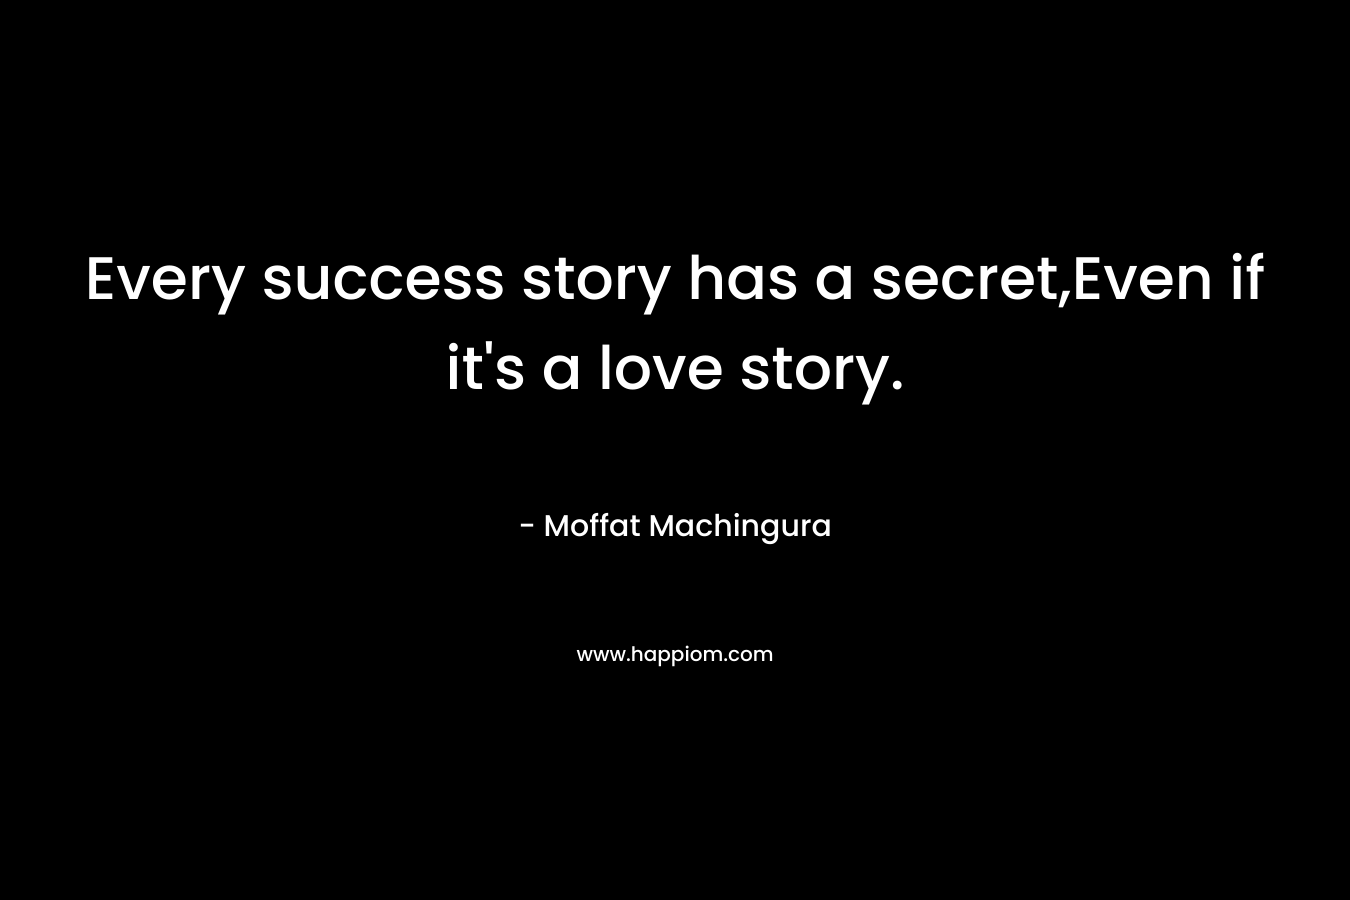 Every success story has a secret,Even if it's a love story.